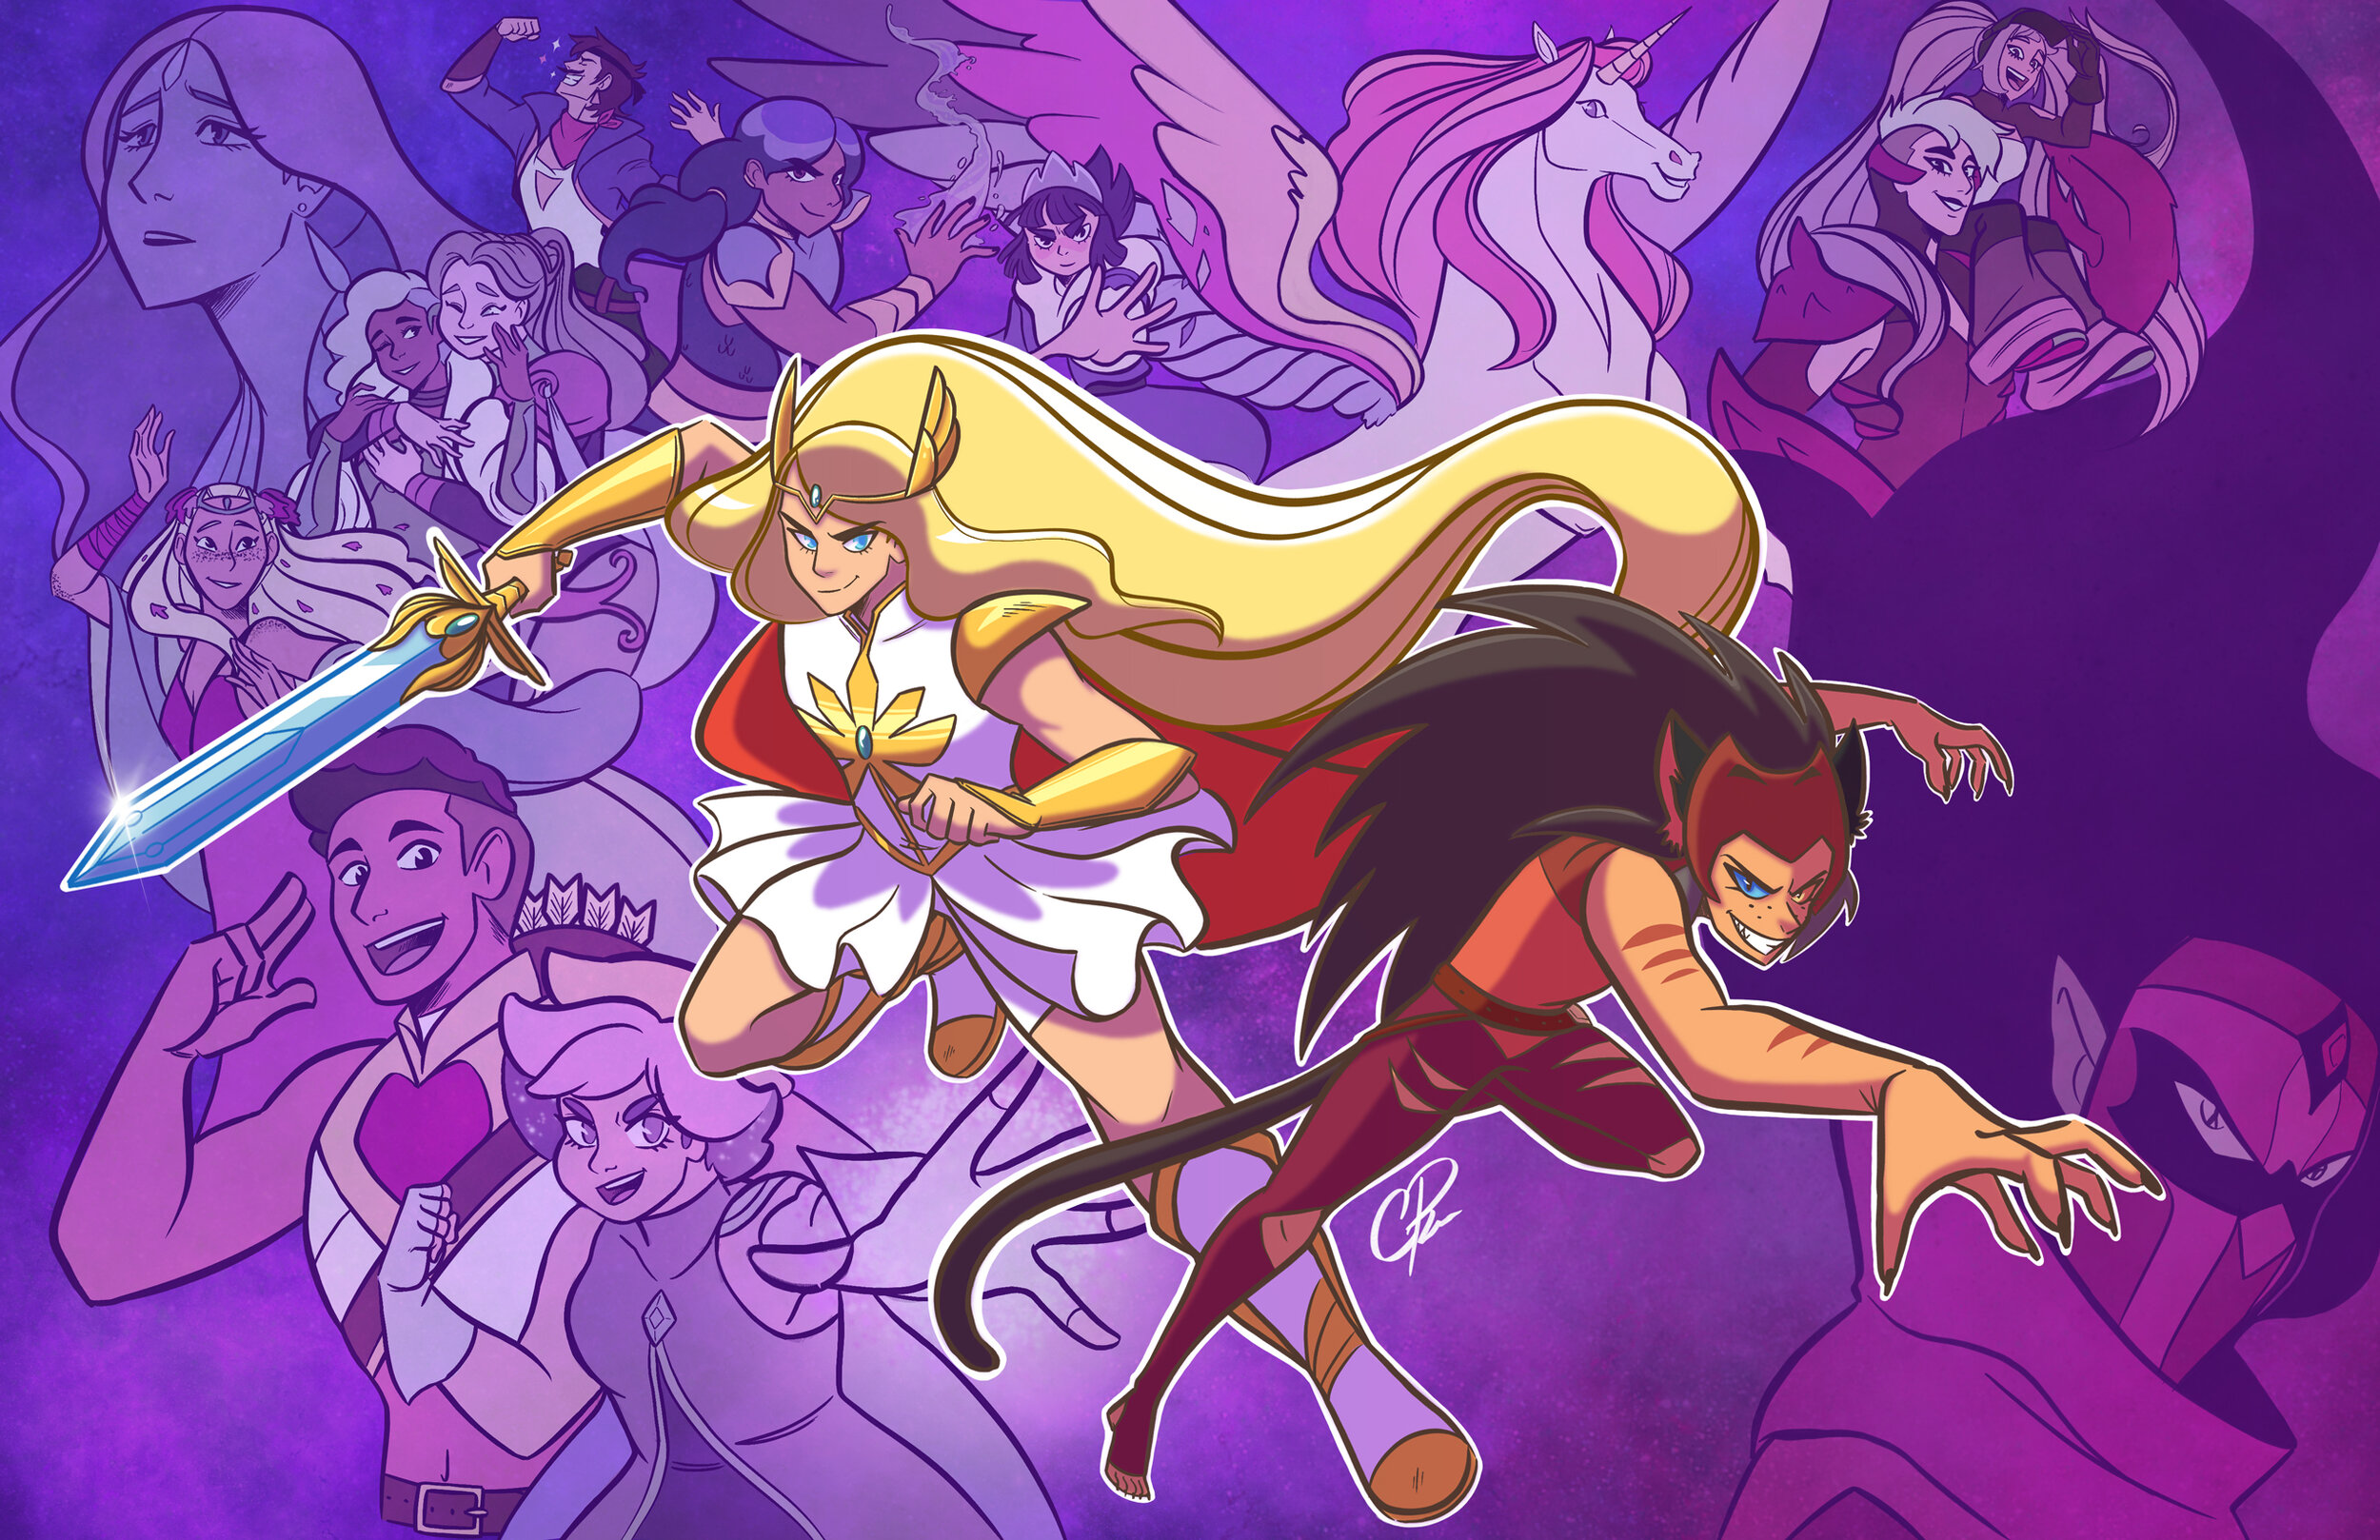 "We Must Be Strong" (She-Ra)